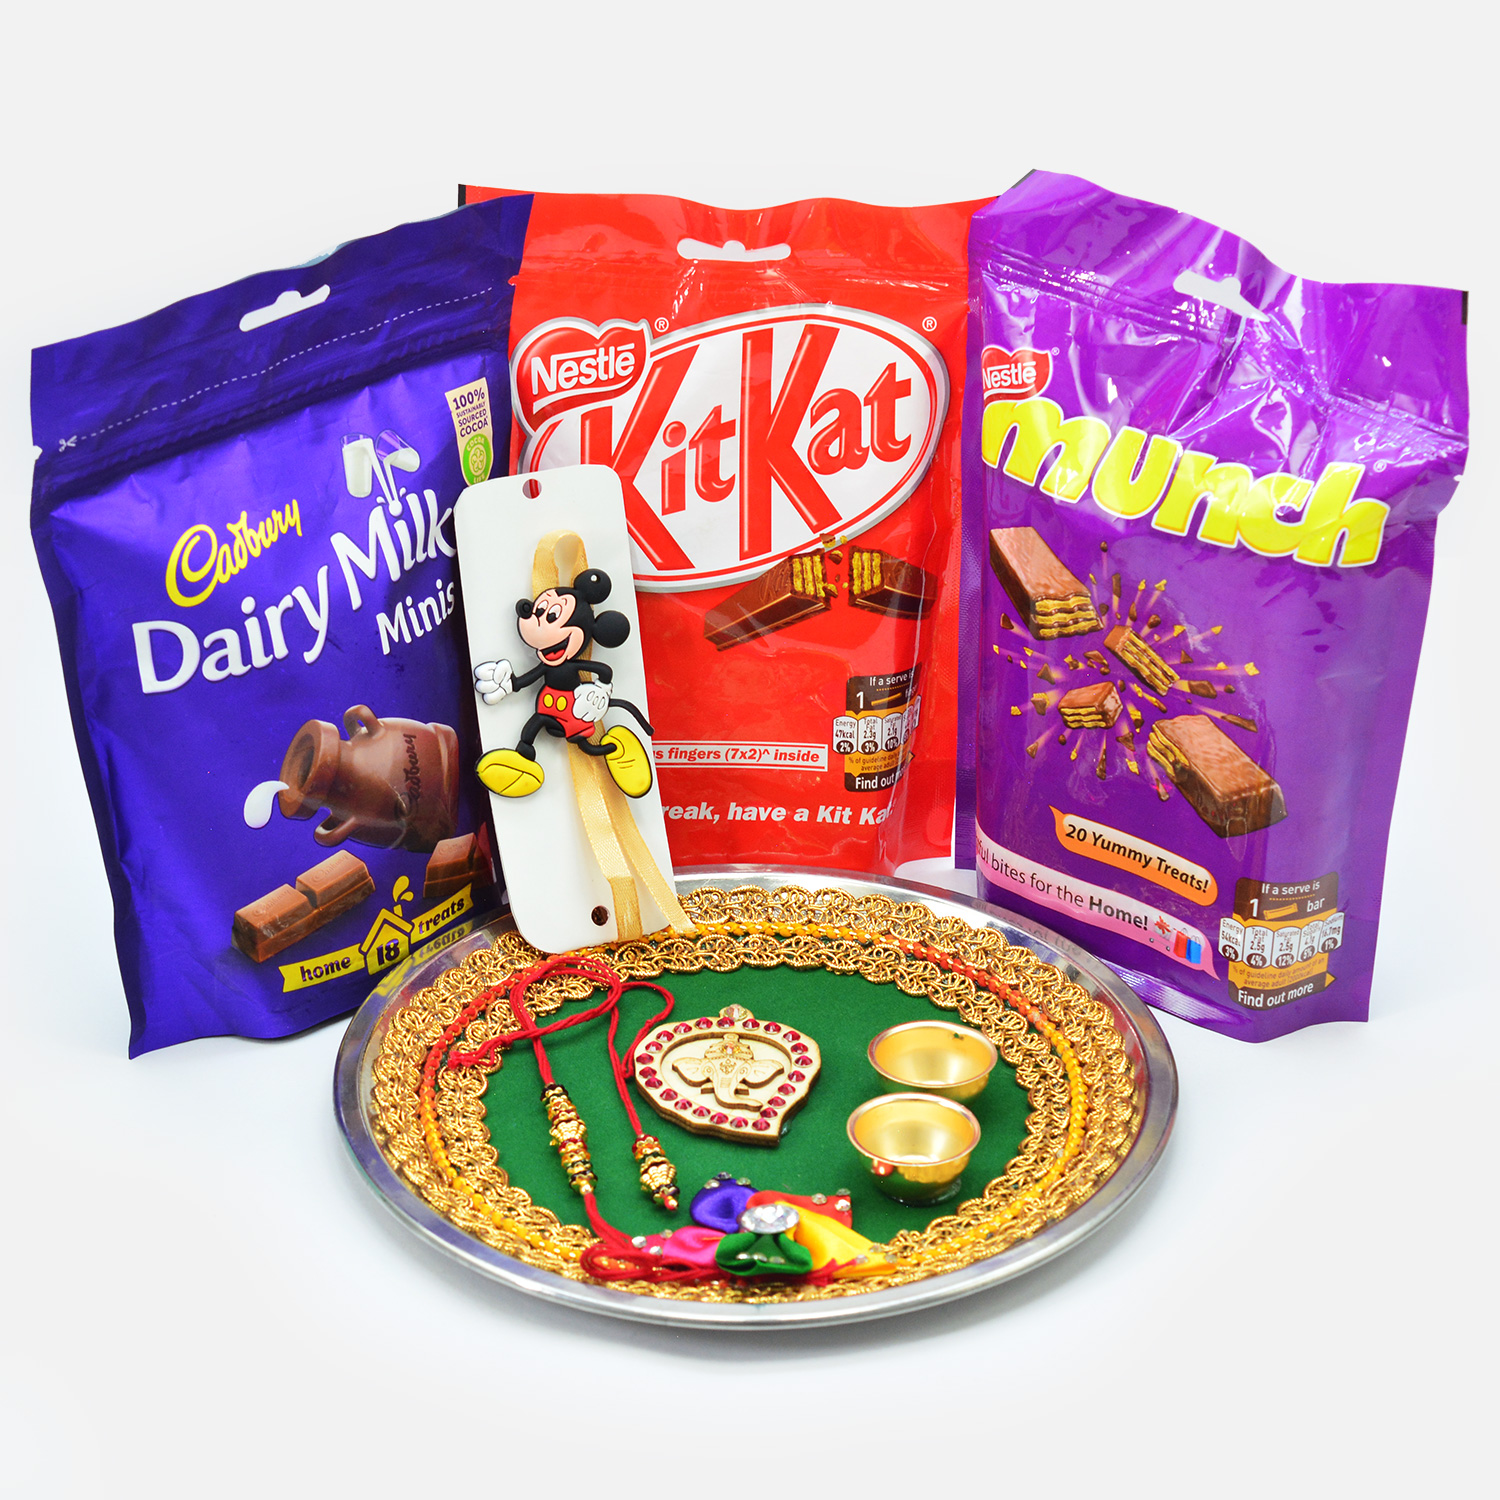 Dairy Milk Kitkat and Much Pack of Chocolates Hamper with Rakhis and Divine Puja Thali